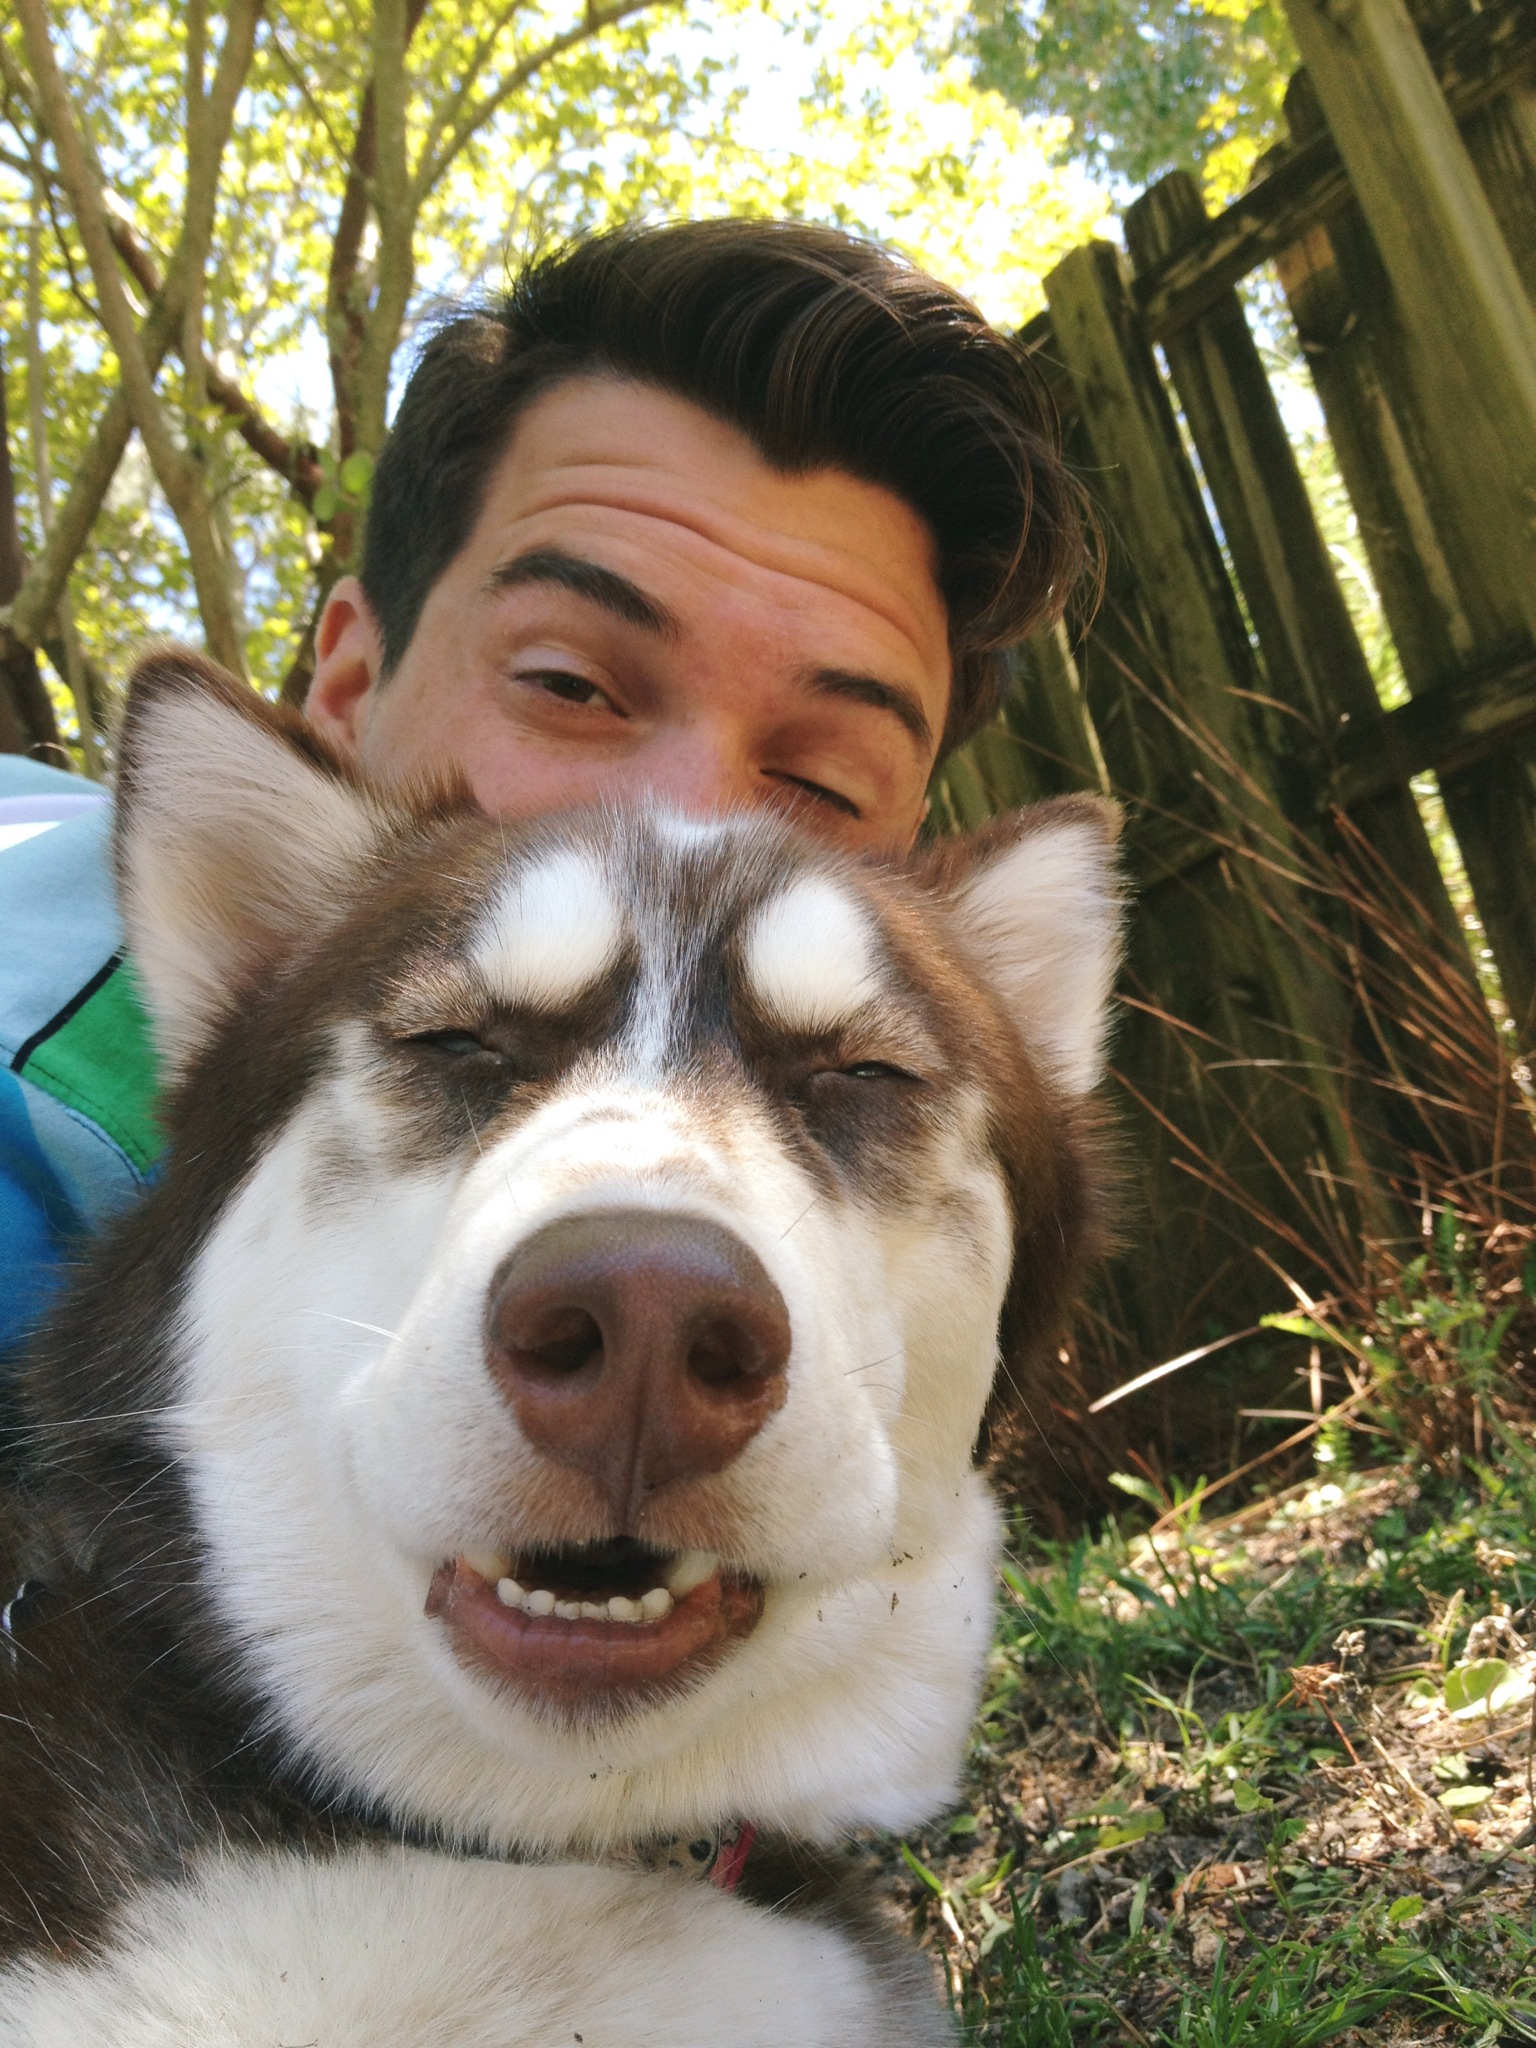 A man takes a self picture with his pet dog and his pet dog looks high off of marijuana.